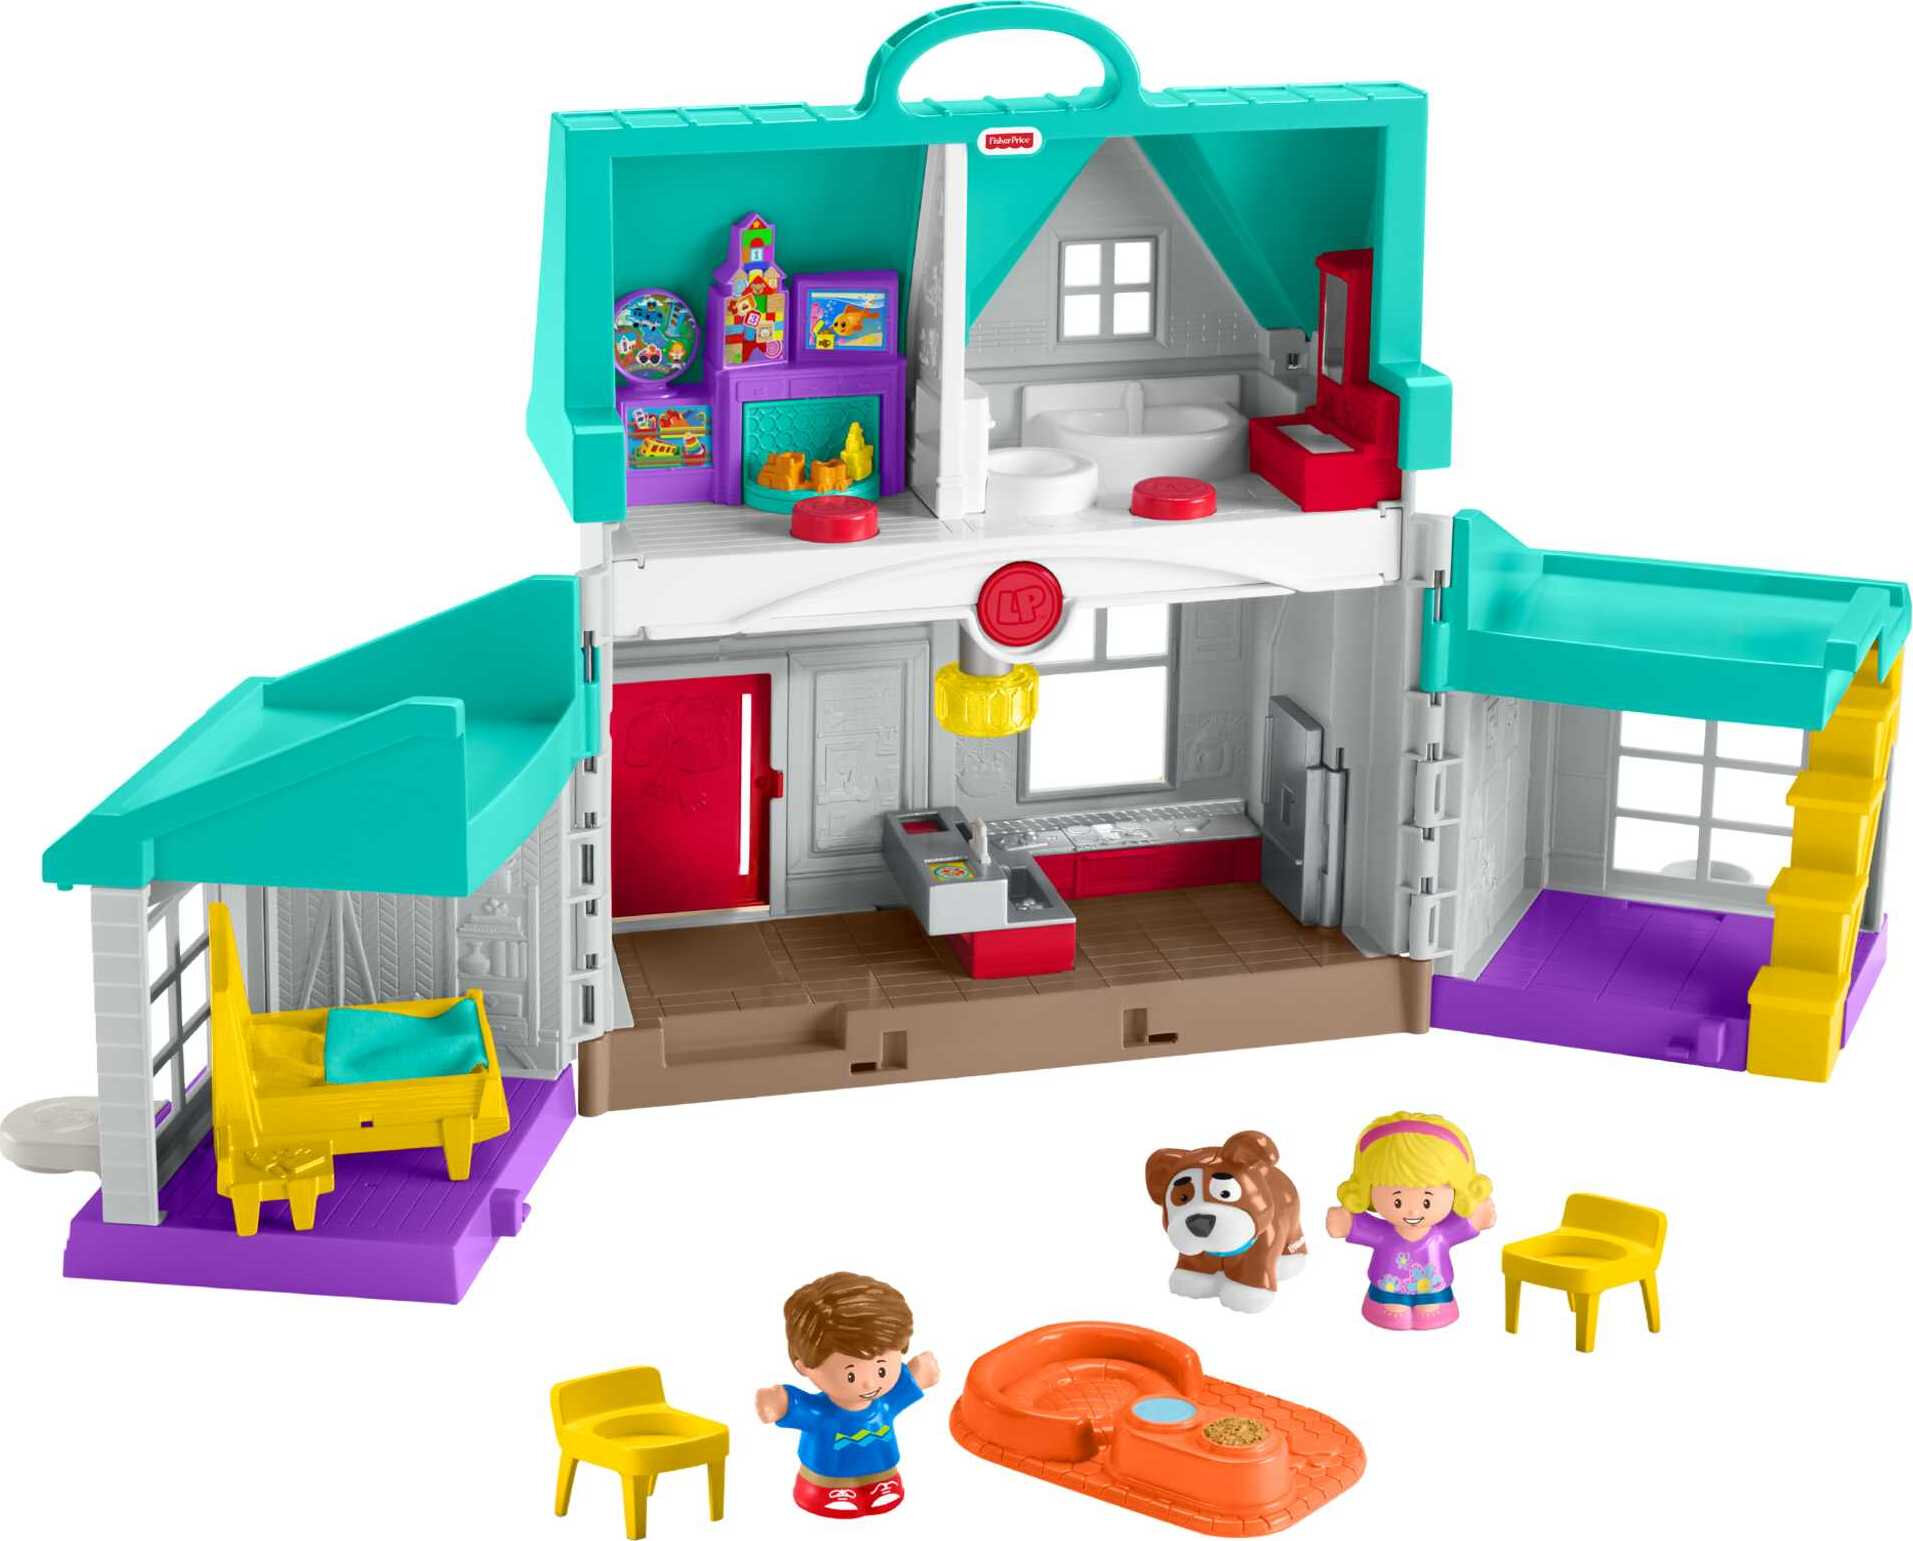 Fisher-Price Little People Big Helpers Interactive Home Playset with Emma and Jack, Blue - image 1 of 8